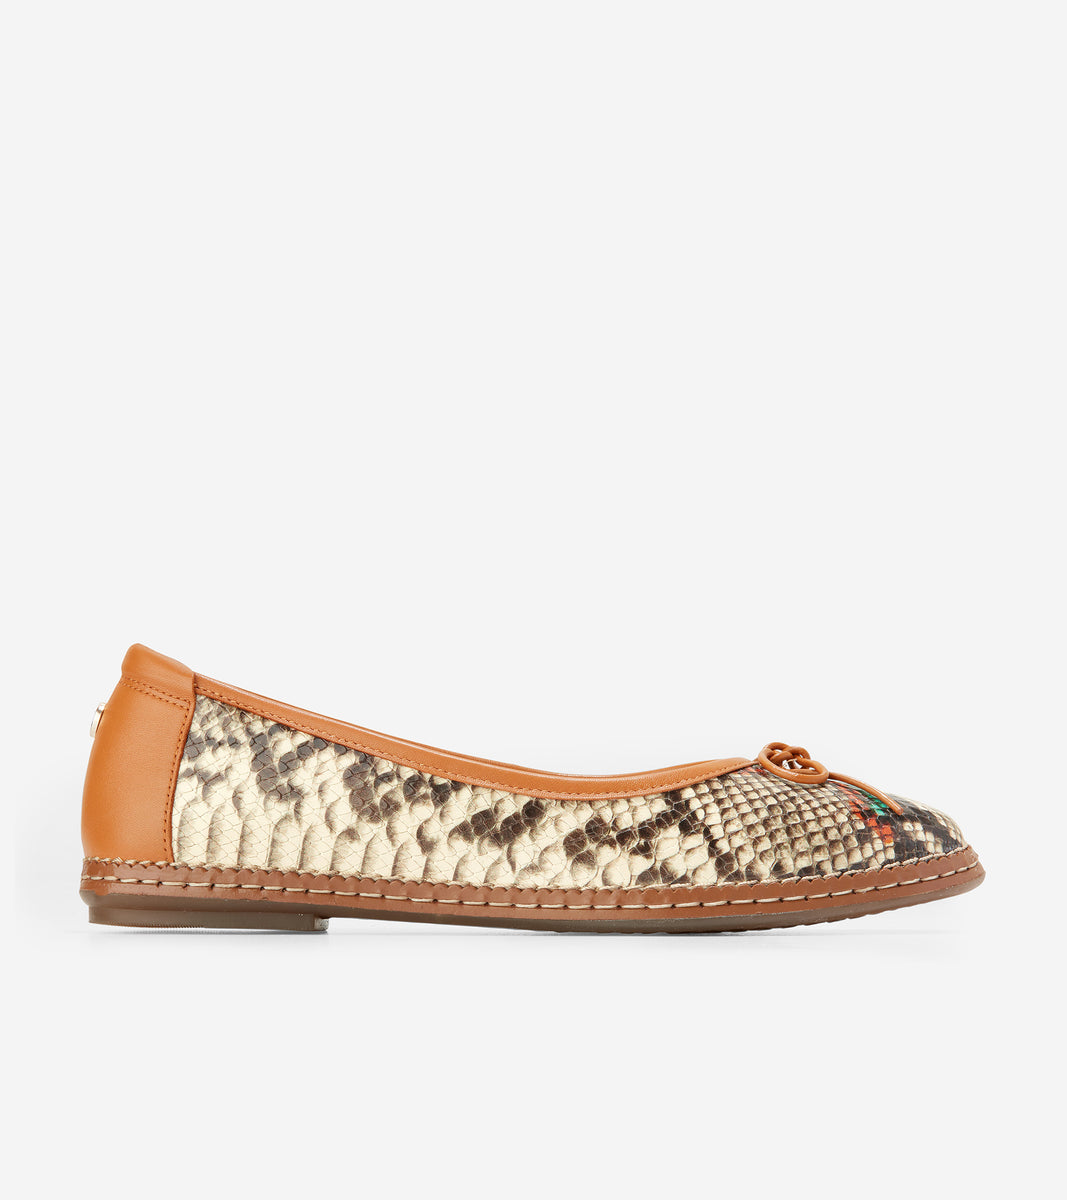 ColeHaan-Cloudfeel All-Day Ballet Flat-w21877-Crafted Snake Print